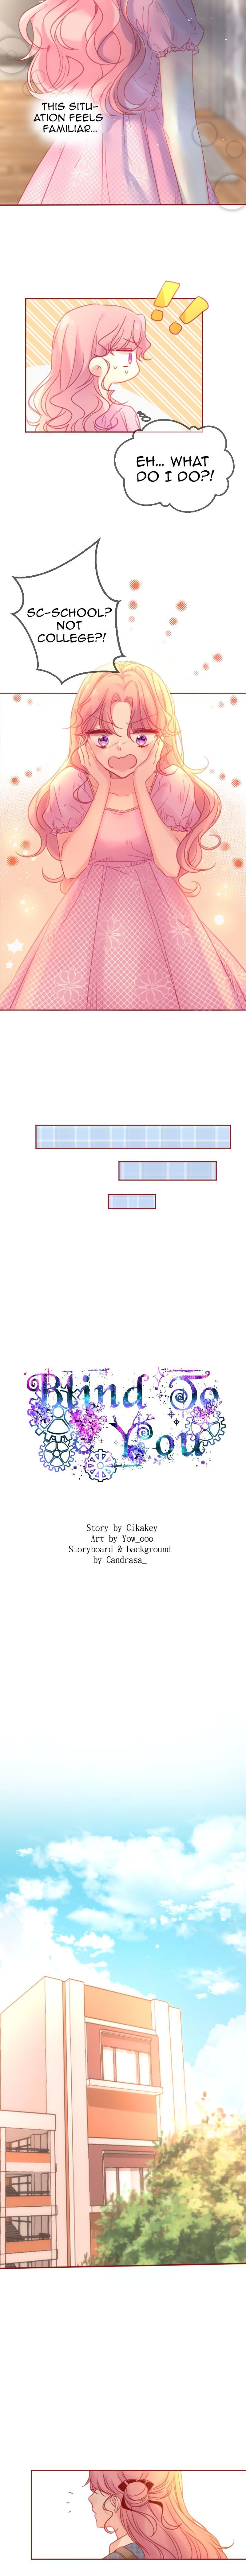 Blind To You Chapter 3 - Picture 2